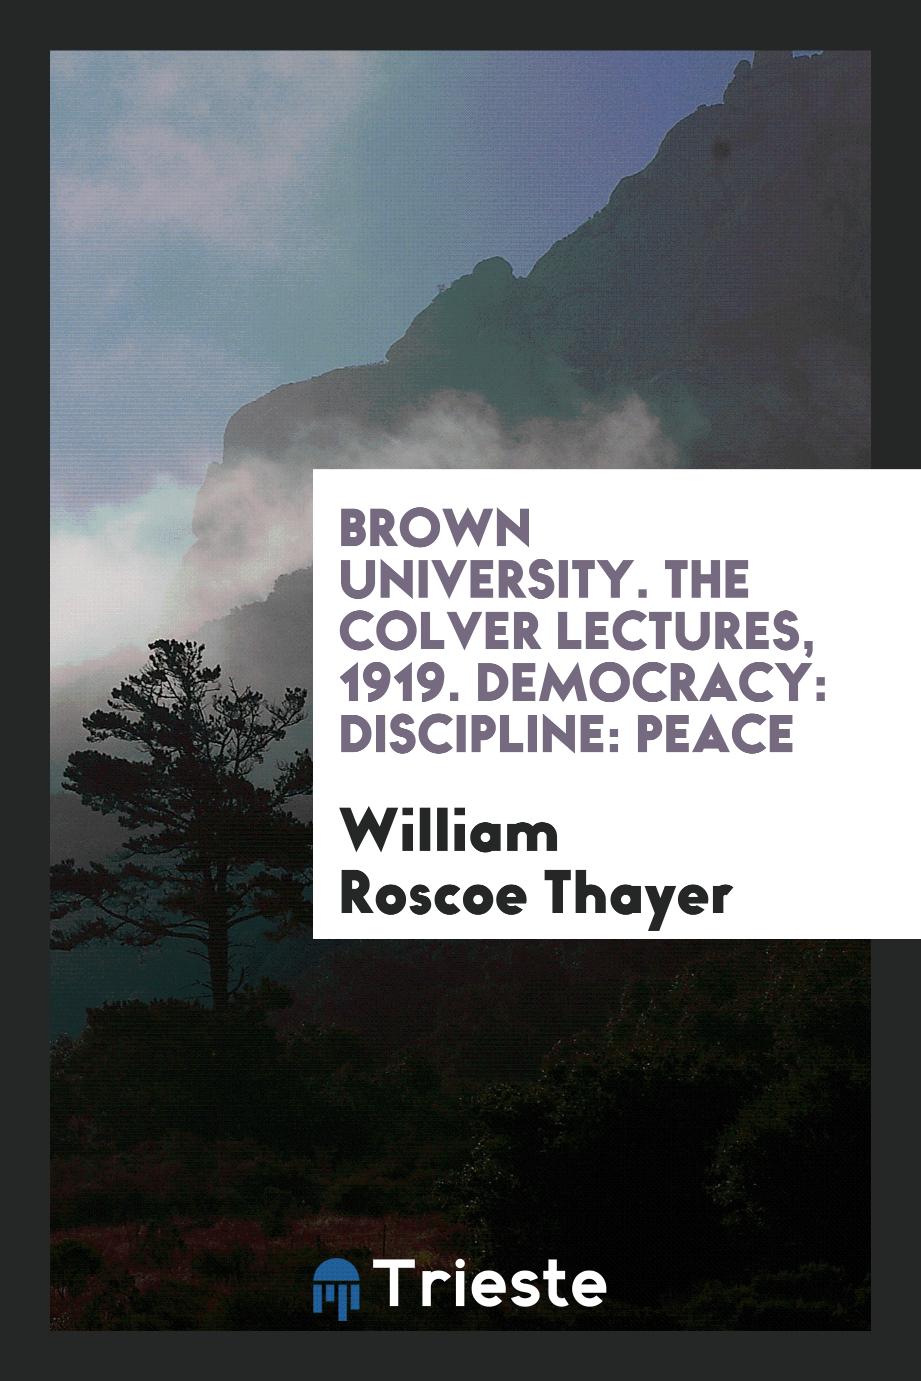 Brown University. The Colver Lectures, 1919. Democracy: Discipline: Peace